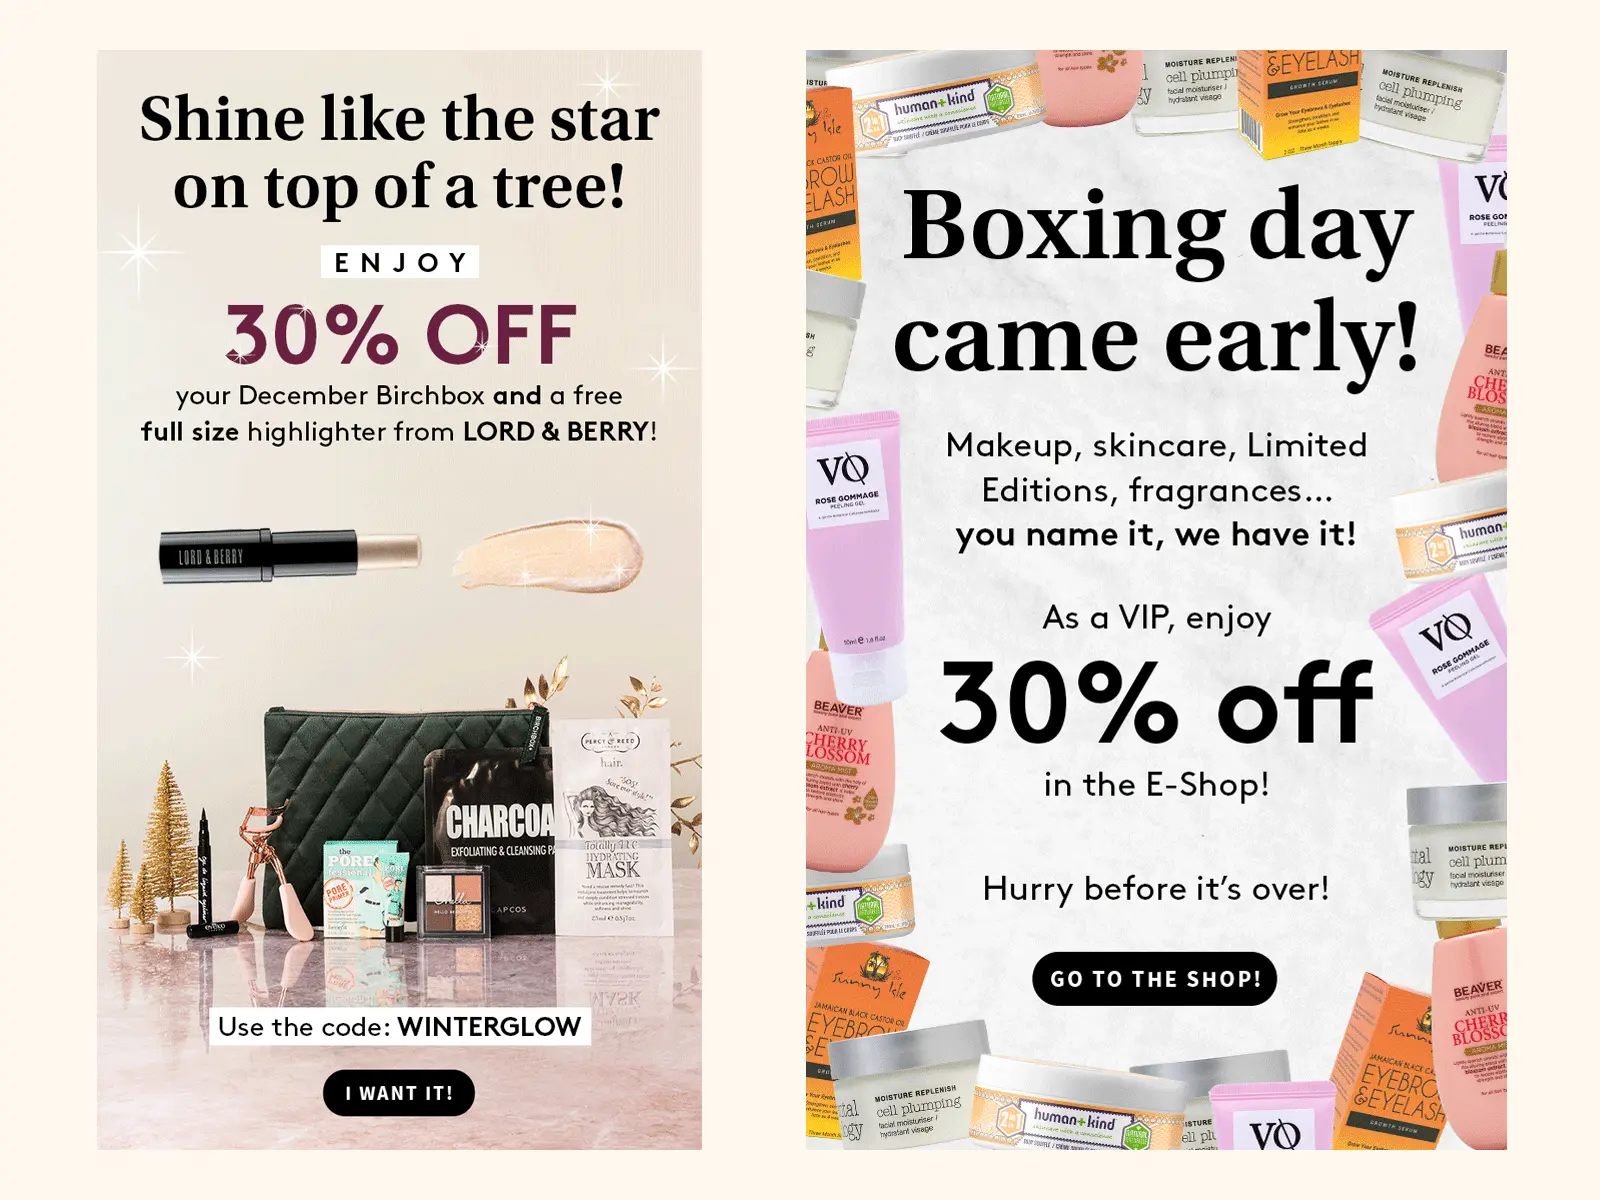 Cosmetic brand email design promoting sales and discounts